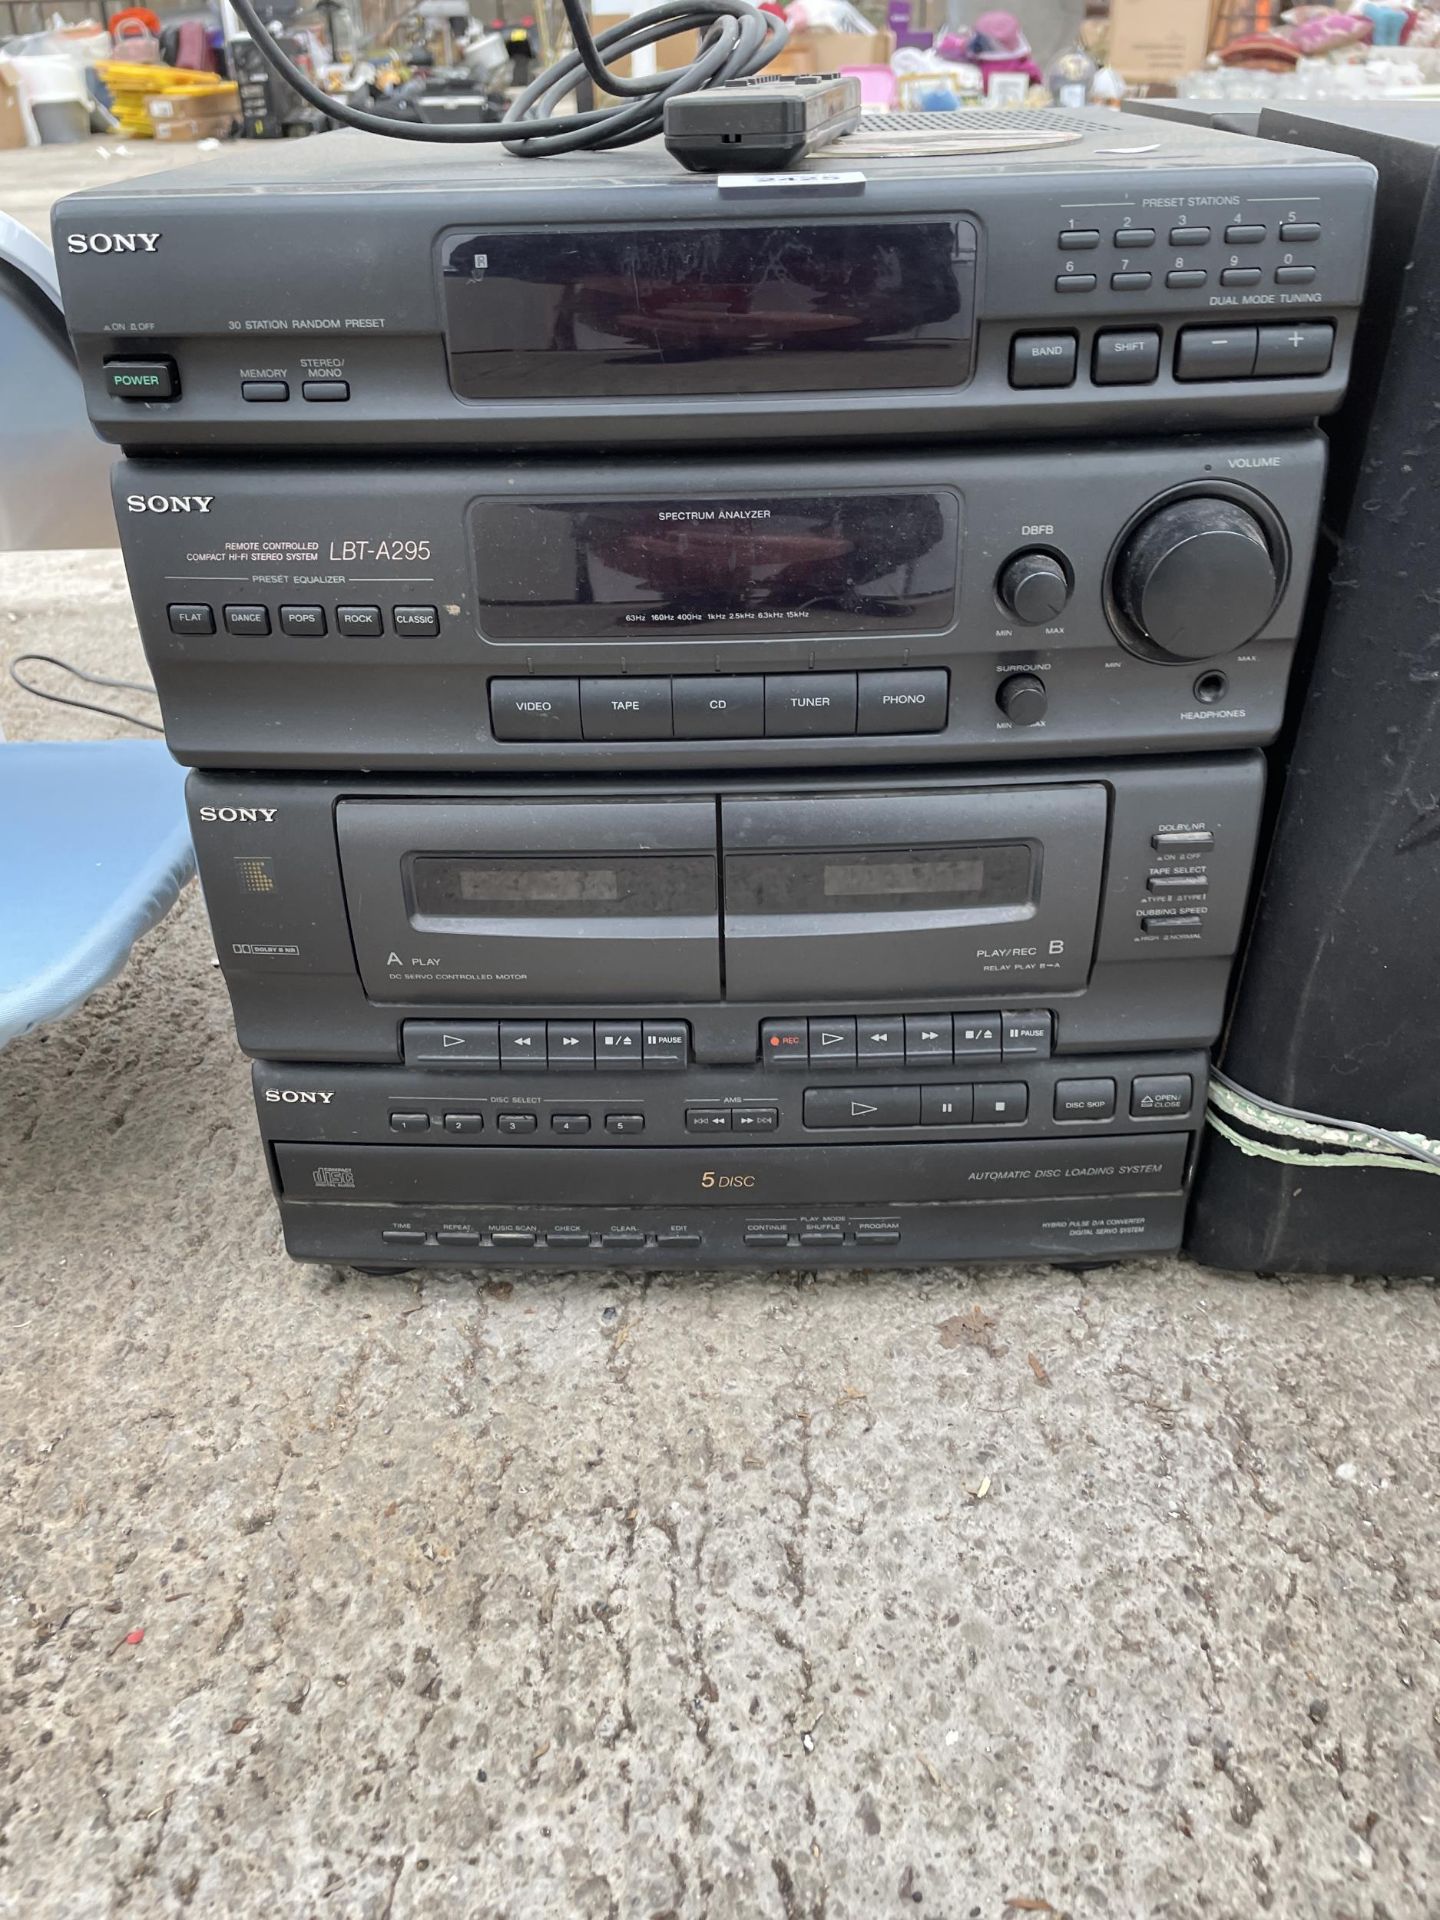 A SONY STEREO SYSTEM WITH A PAIR OF SPEAKERS